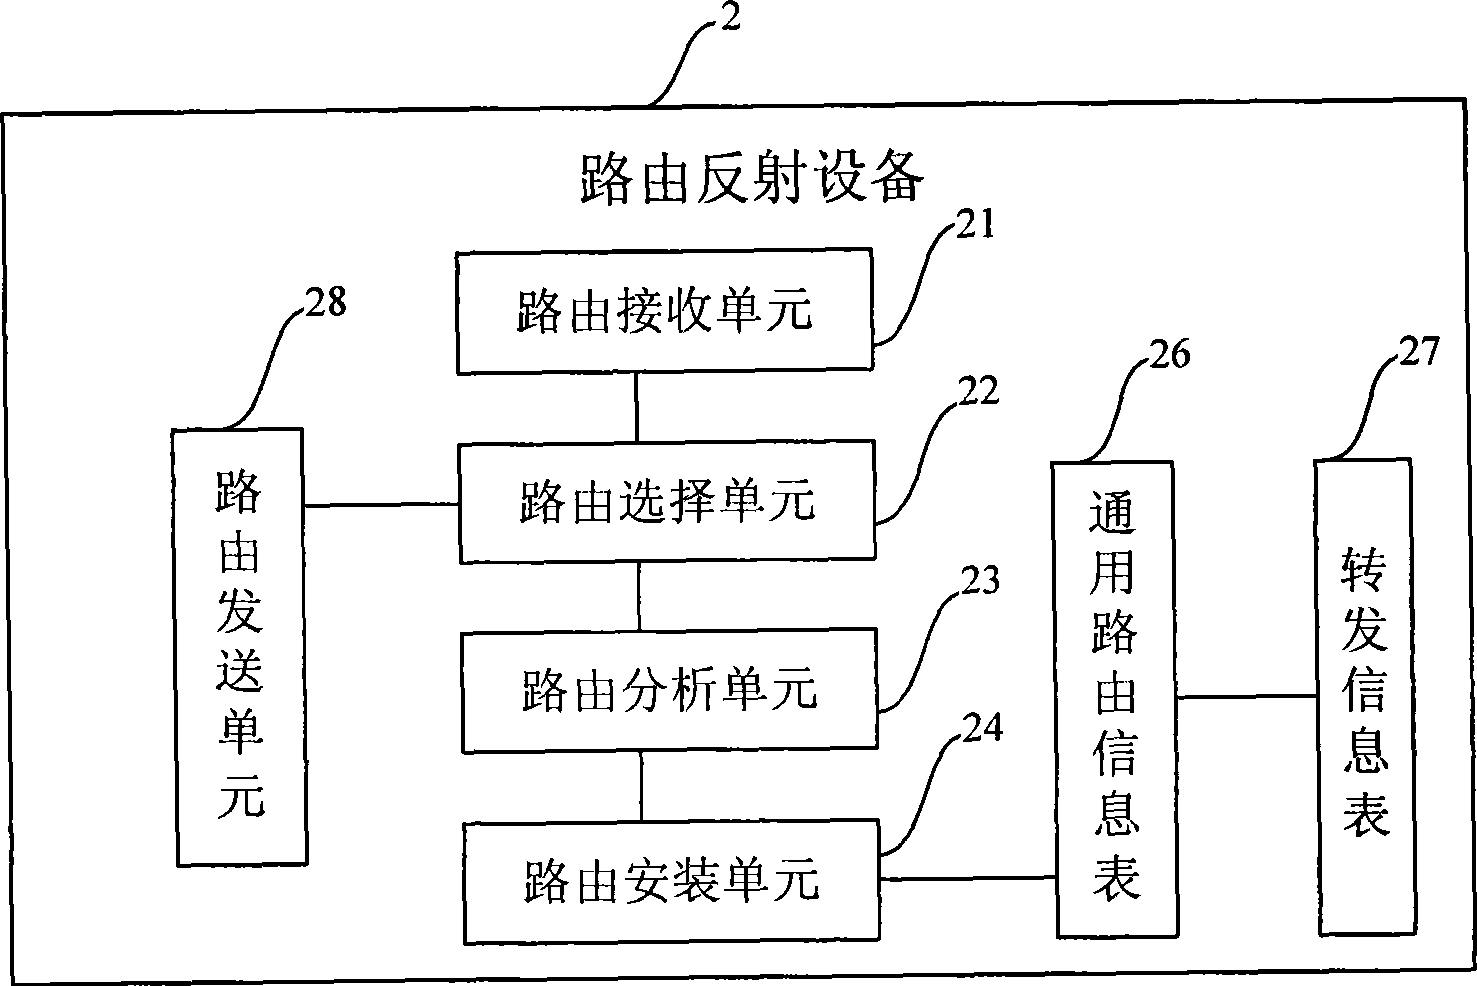 Reflected route processing method and route reflecting device